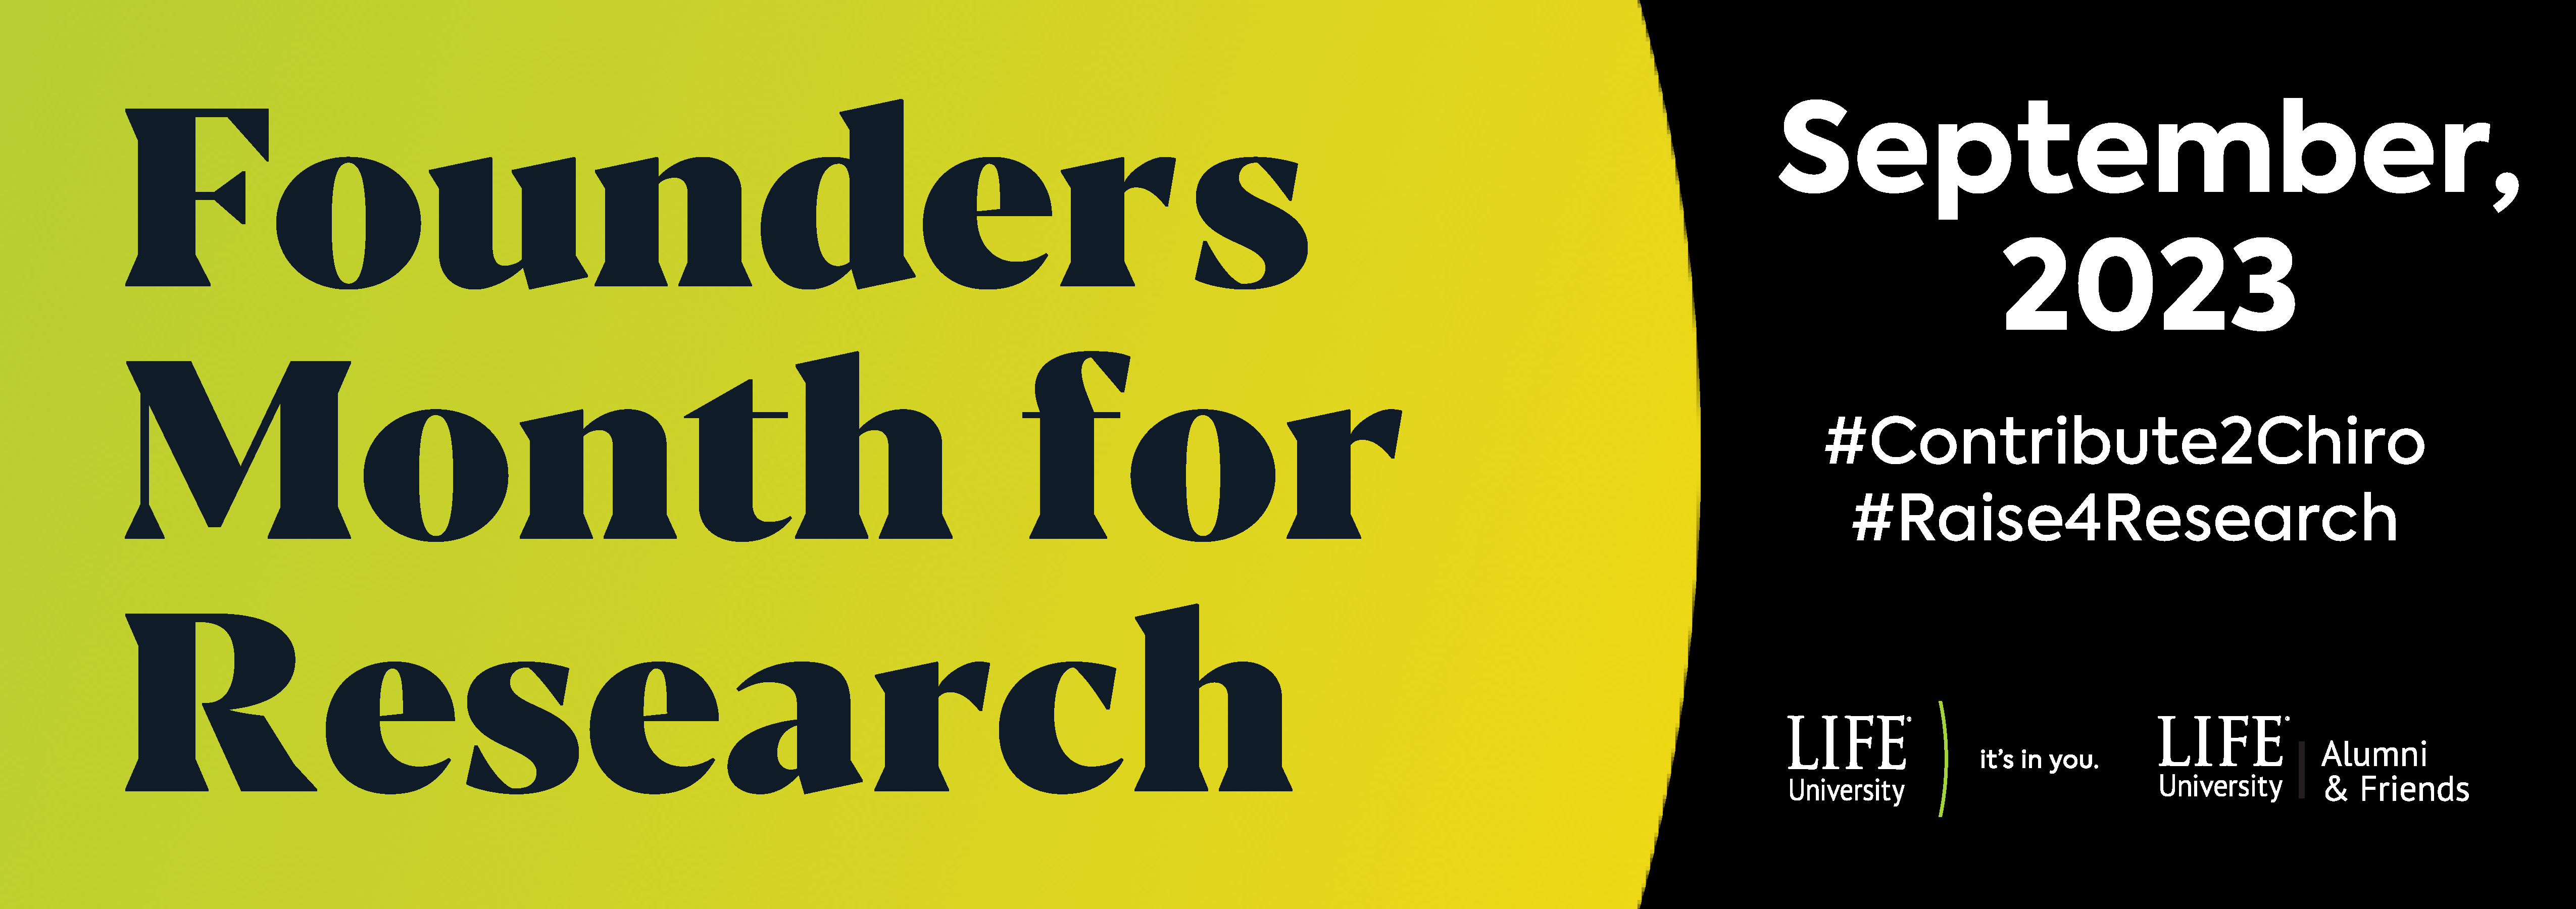 Founder's Month for Research 2023 - Banner